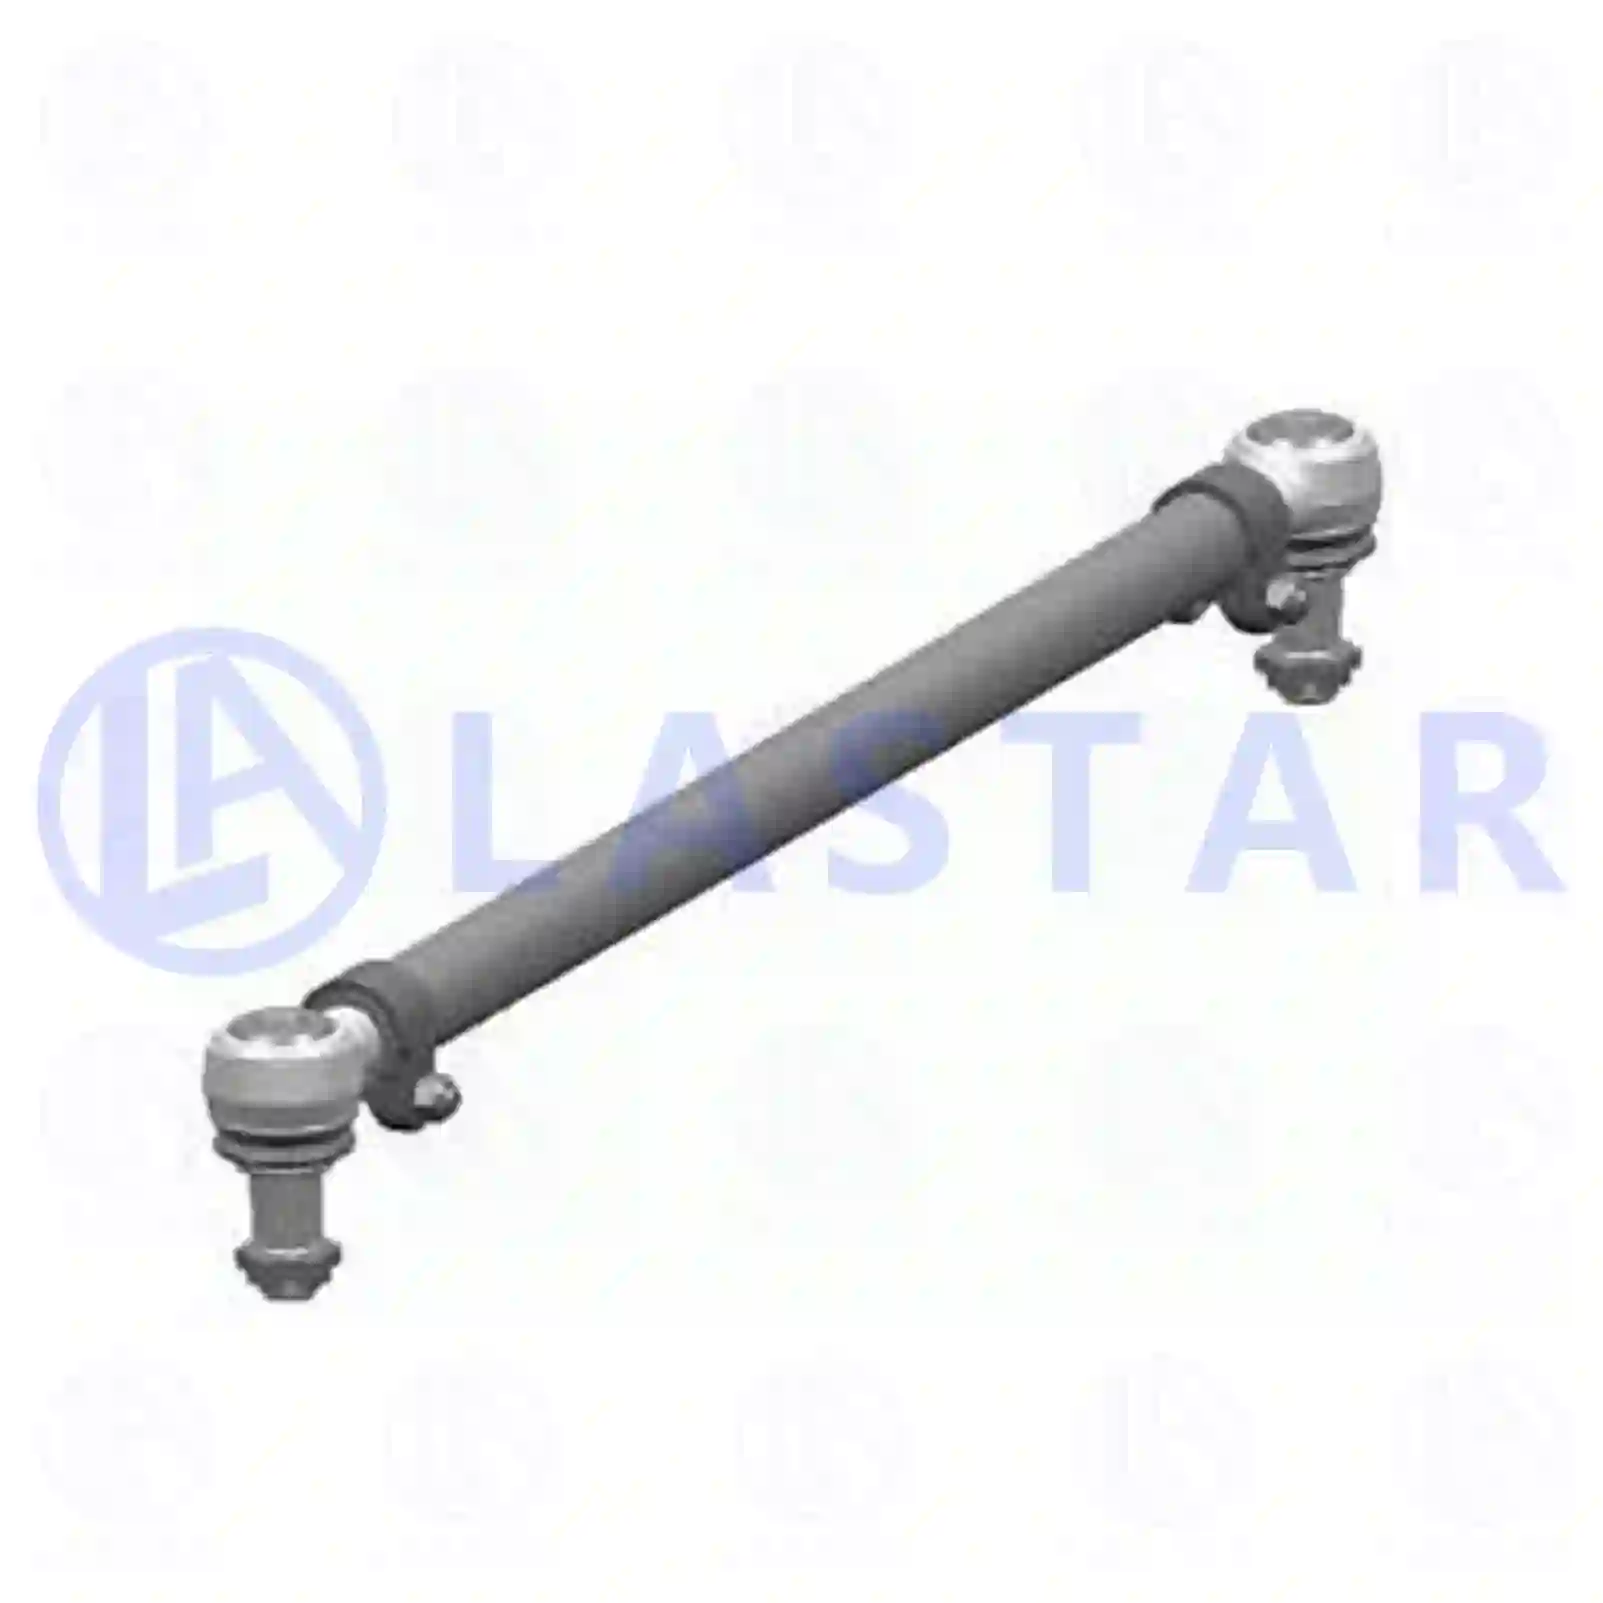 Track rod, 77730781, 6293300003, 6293300603, 6323300103, ||  77730781 Lastar Spare Part | Truck Spare Parts, Auotomotive Spare Parts Track rod, 77730781, 6293300003, 6293300603, 6323300103, ||  77730781 Lastar Spare Part | Truck Spare Parts, Auotomotive Spare Parts